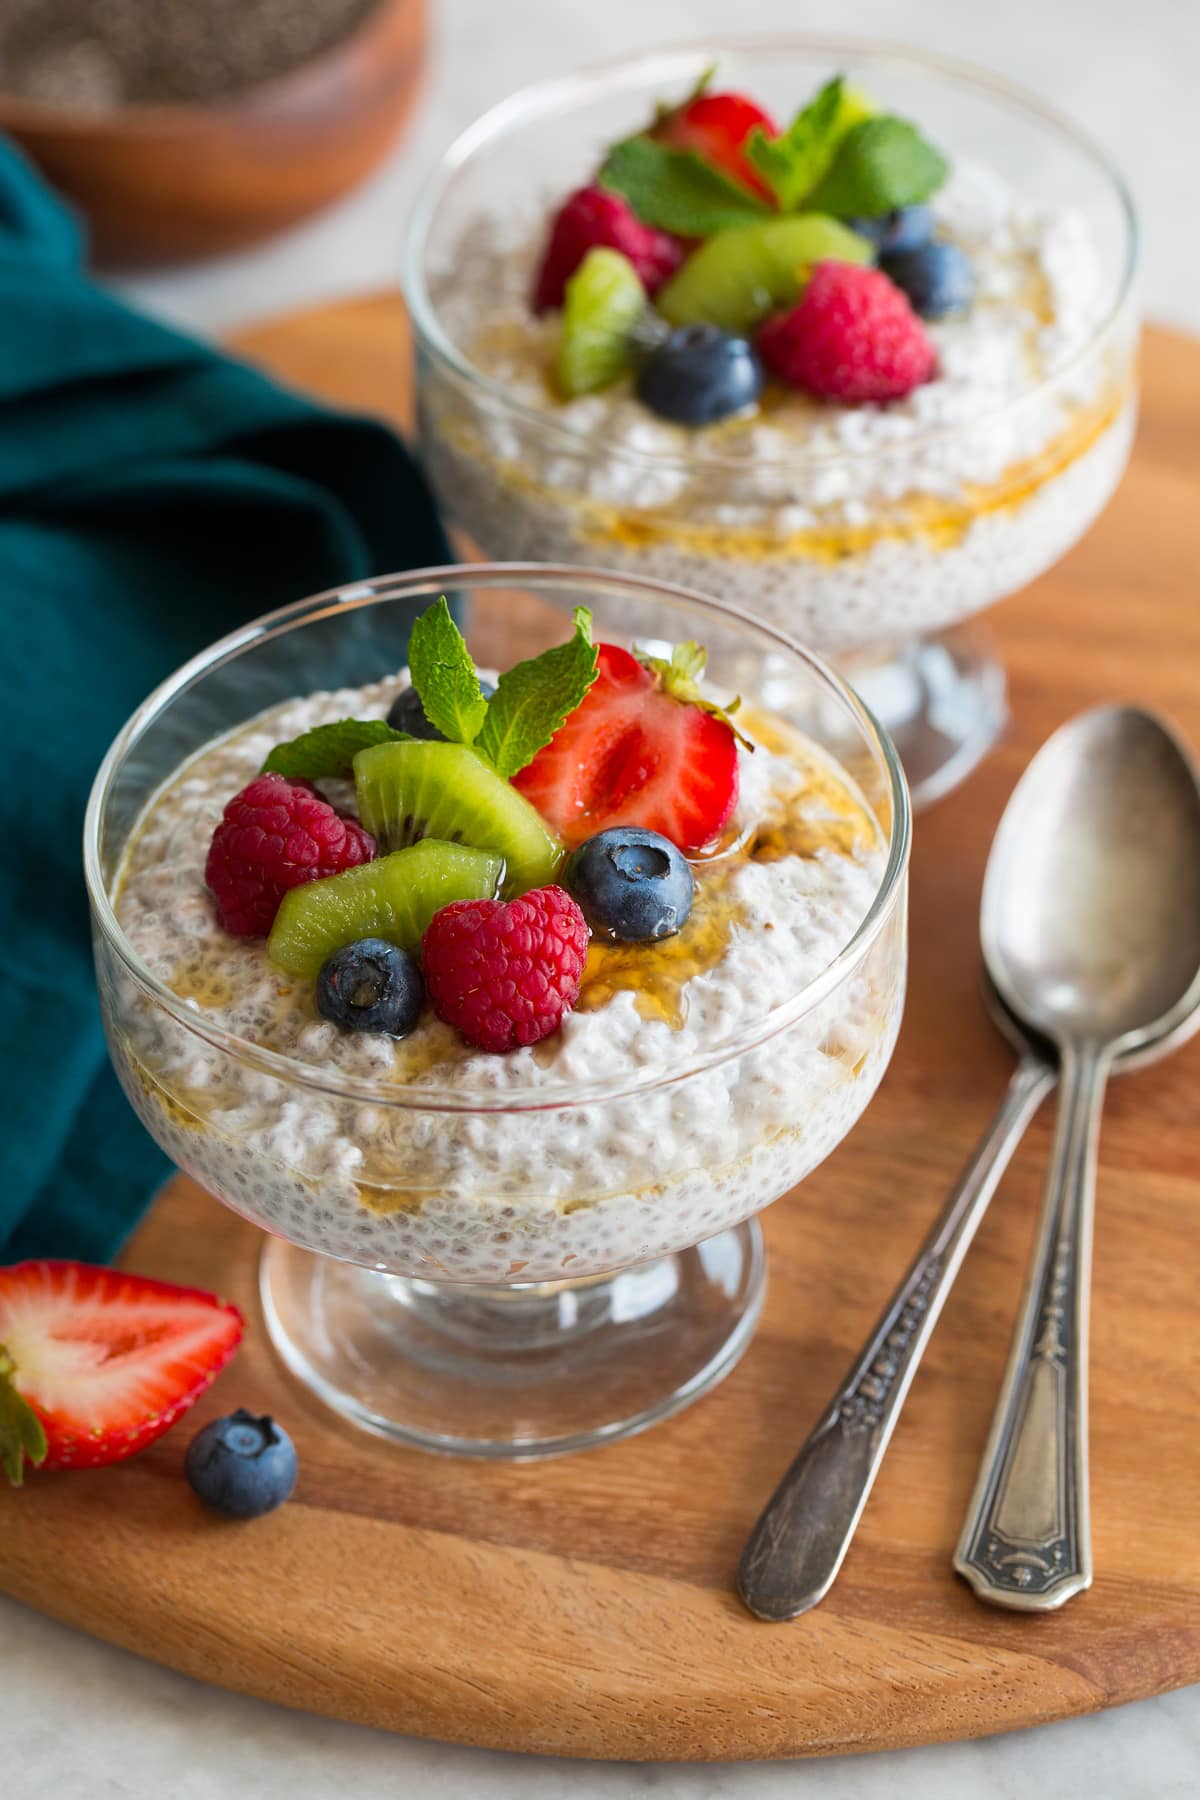 Two servings of chia seed pudding topped with diced fruit.